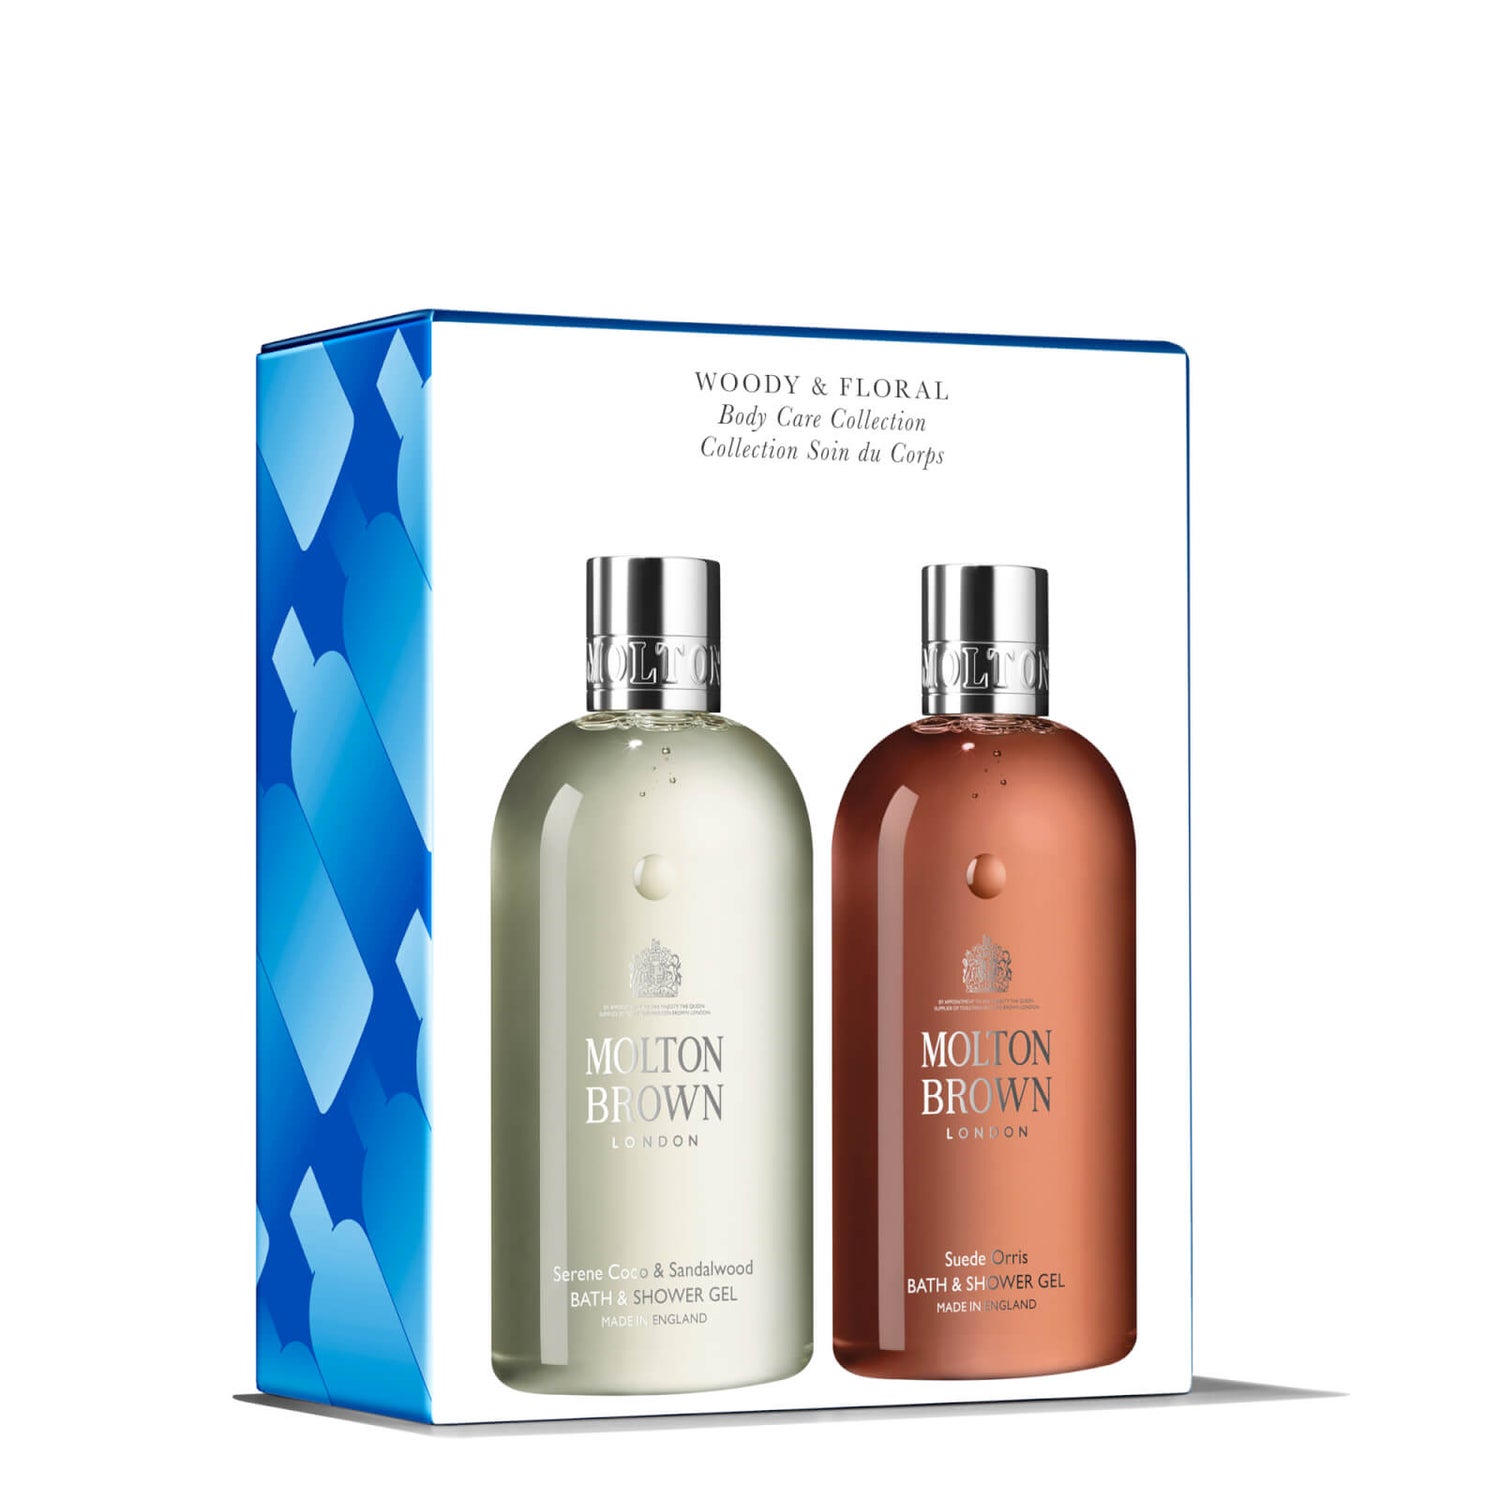 Molton Brown Woody and Floral Body Care Gift Set